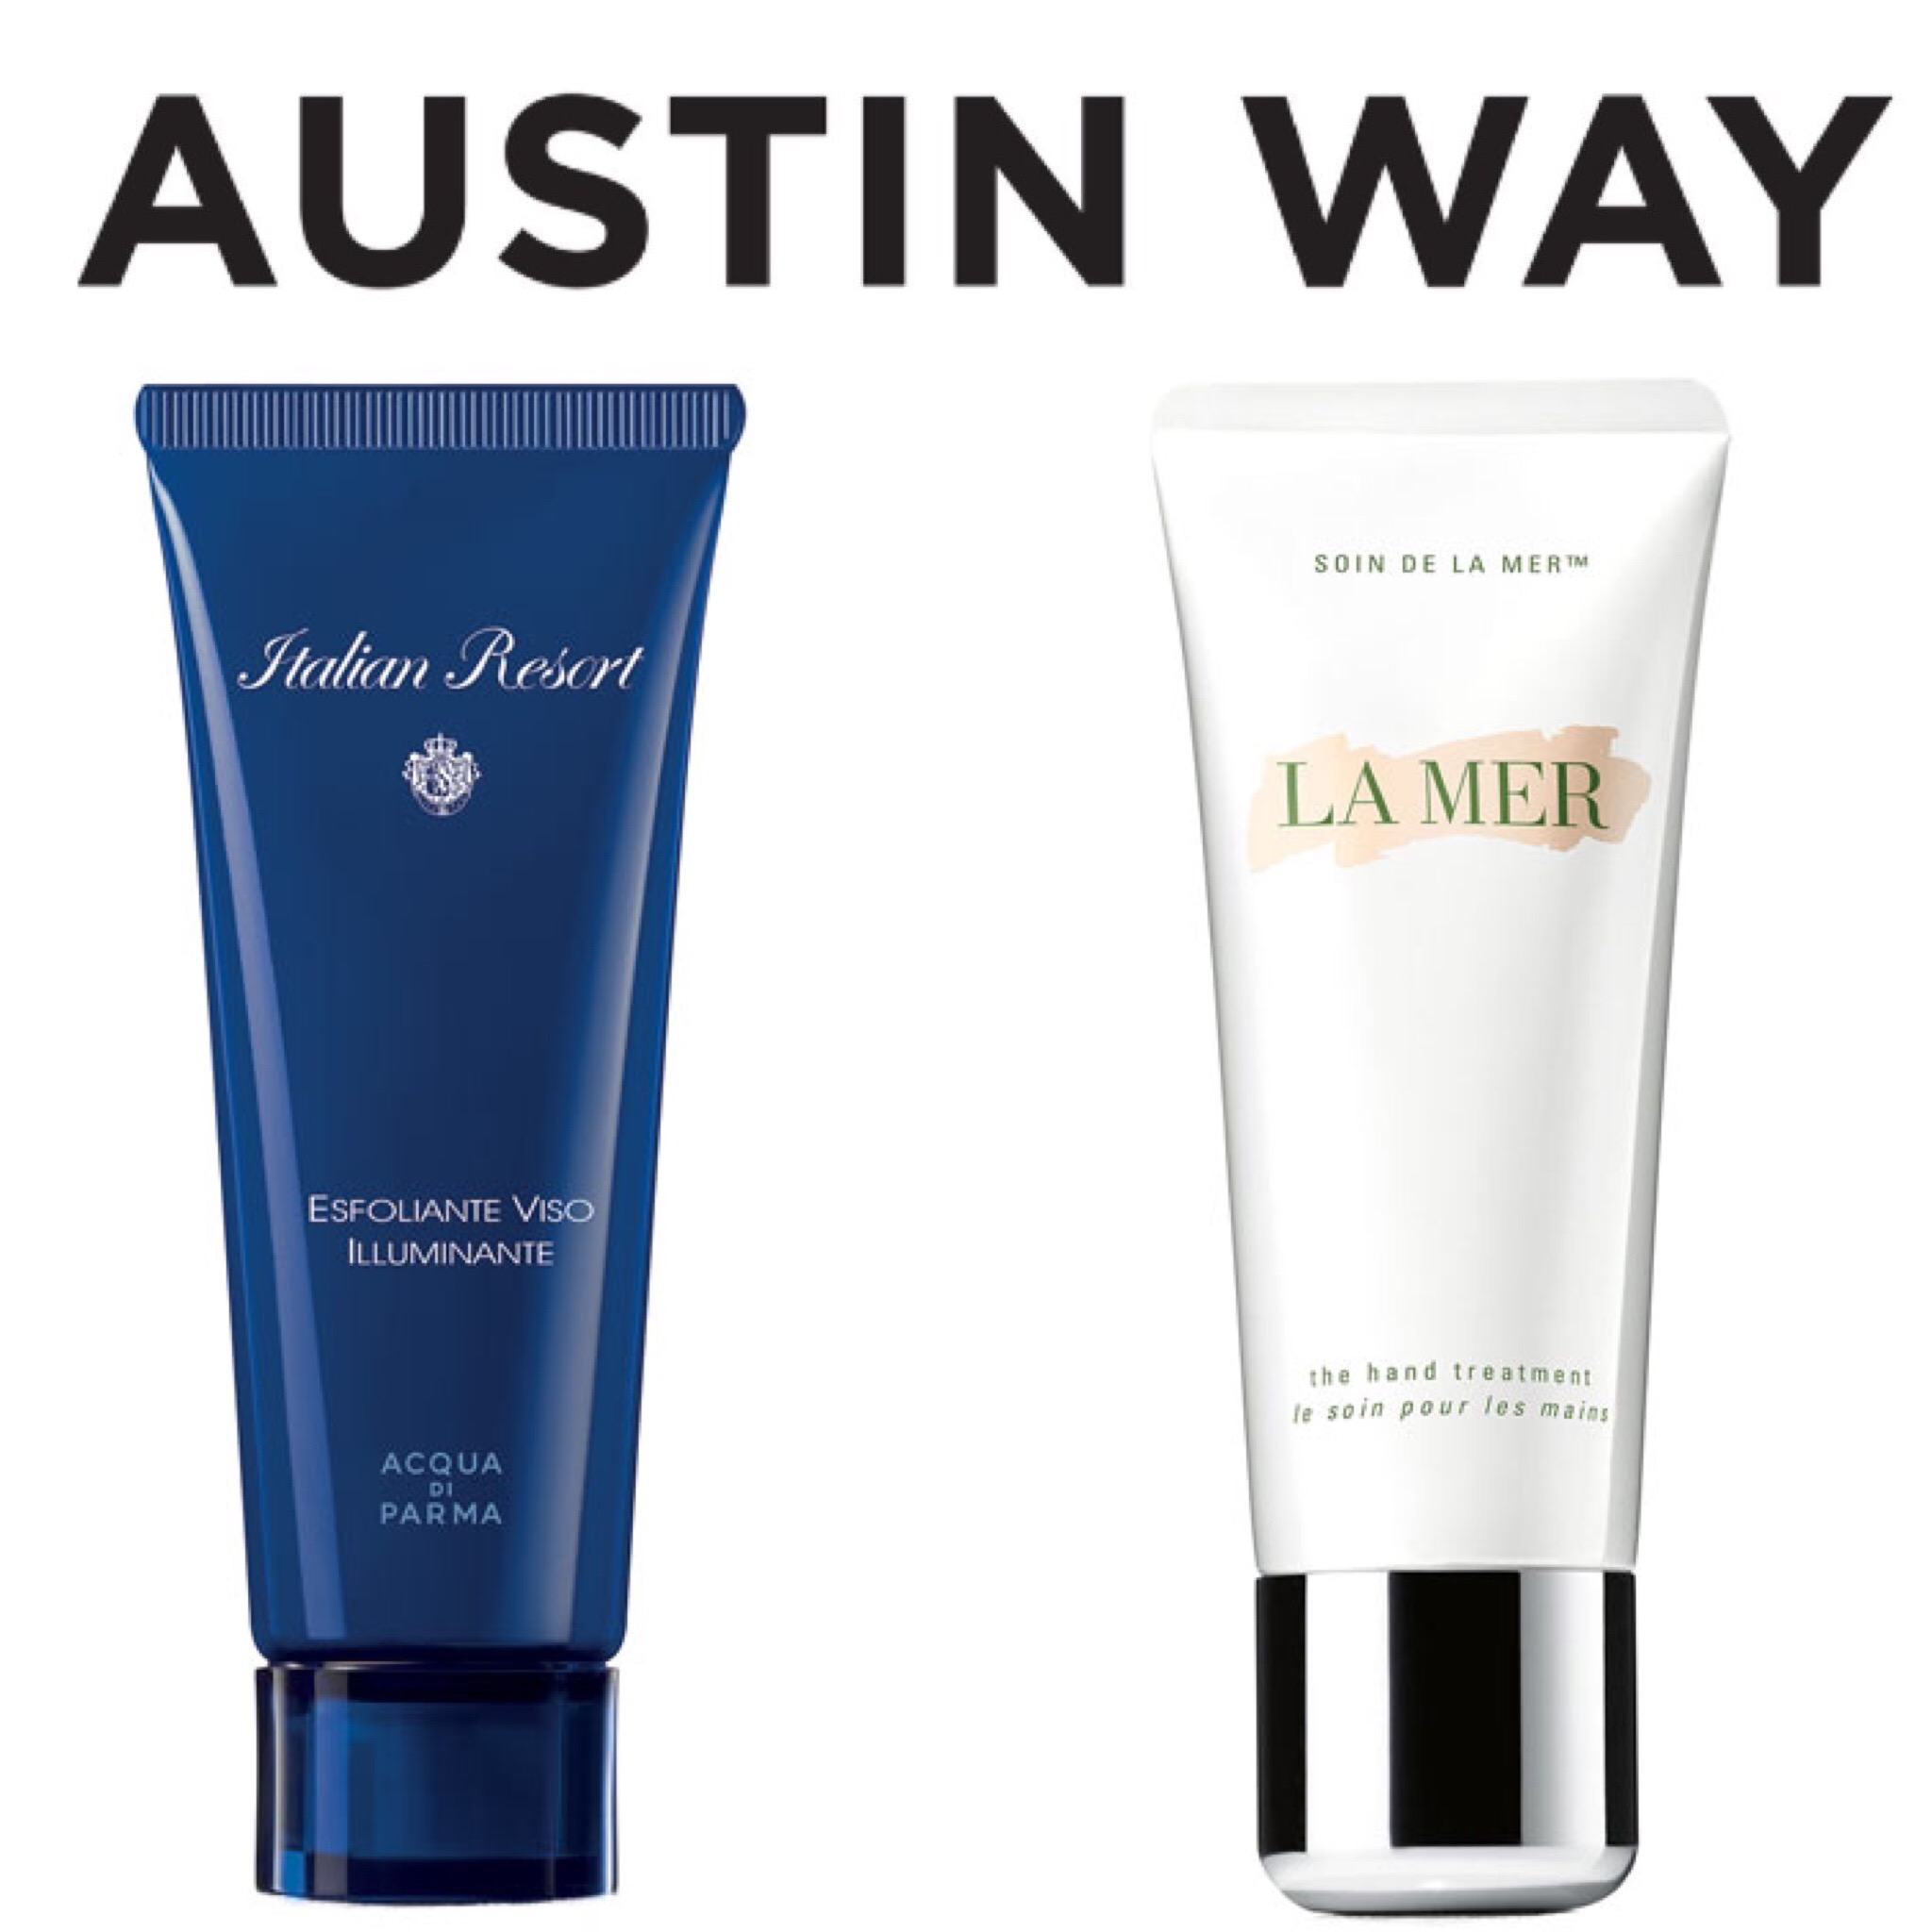  https://austinway.com/spa-products-to-use-at-home-during-the-holidays 